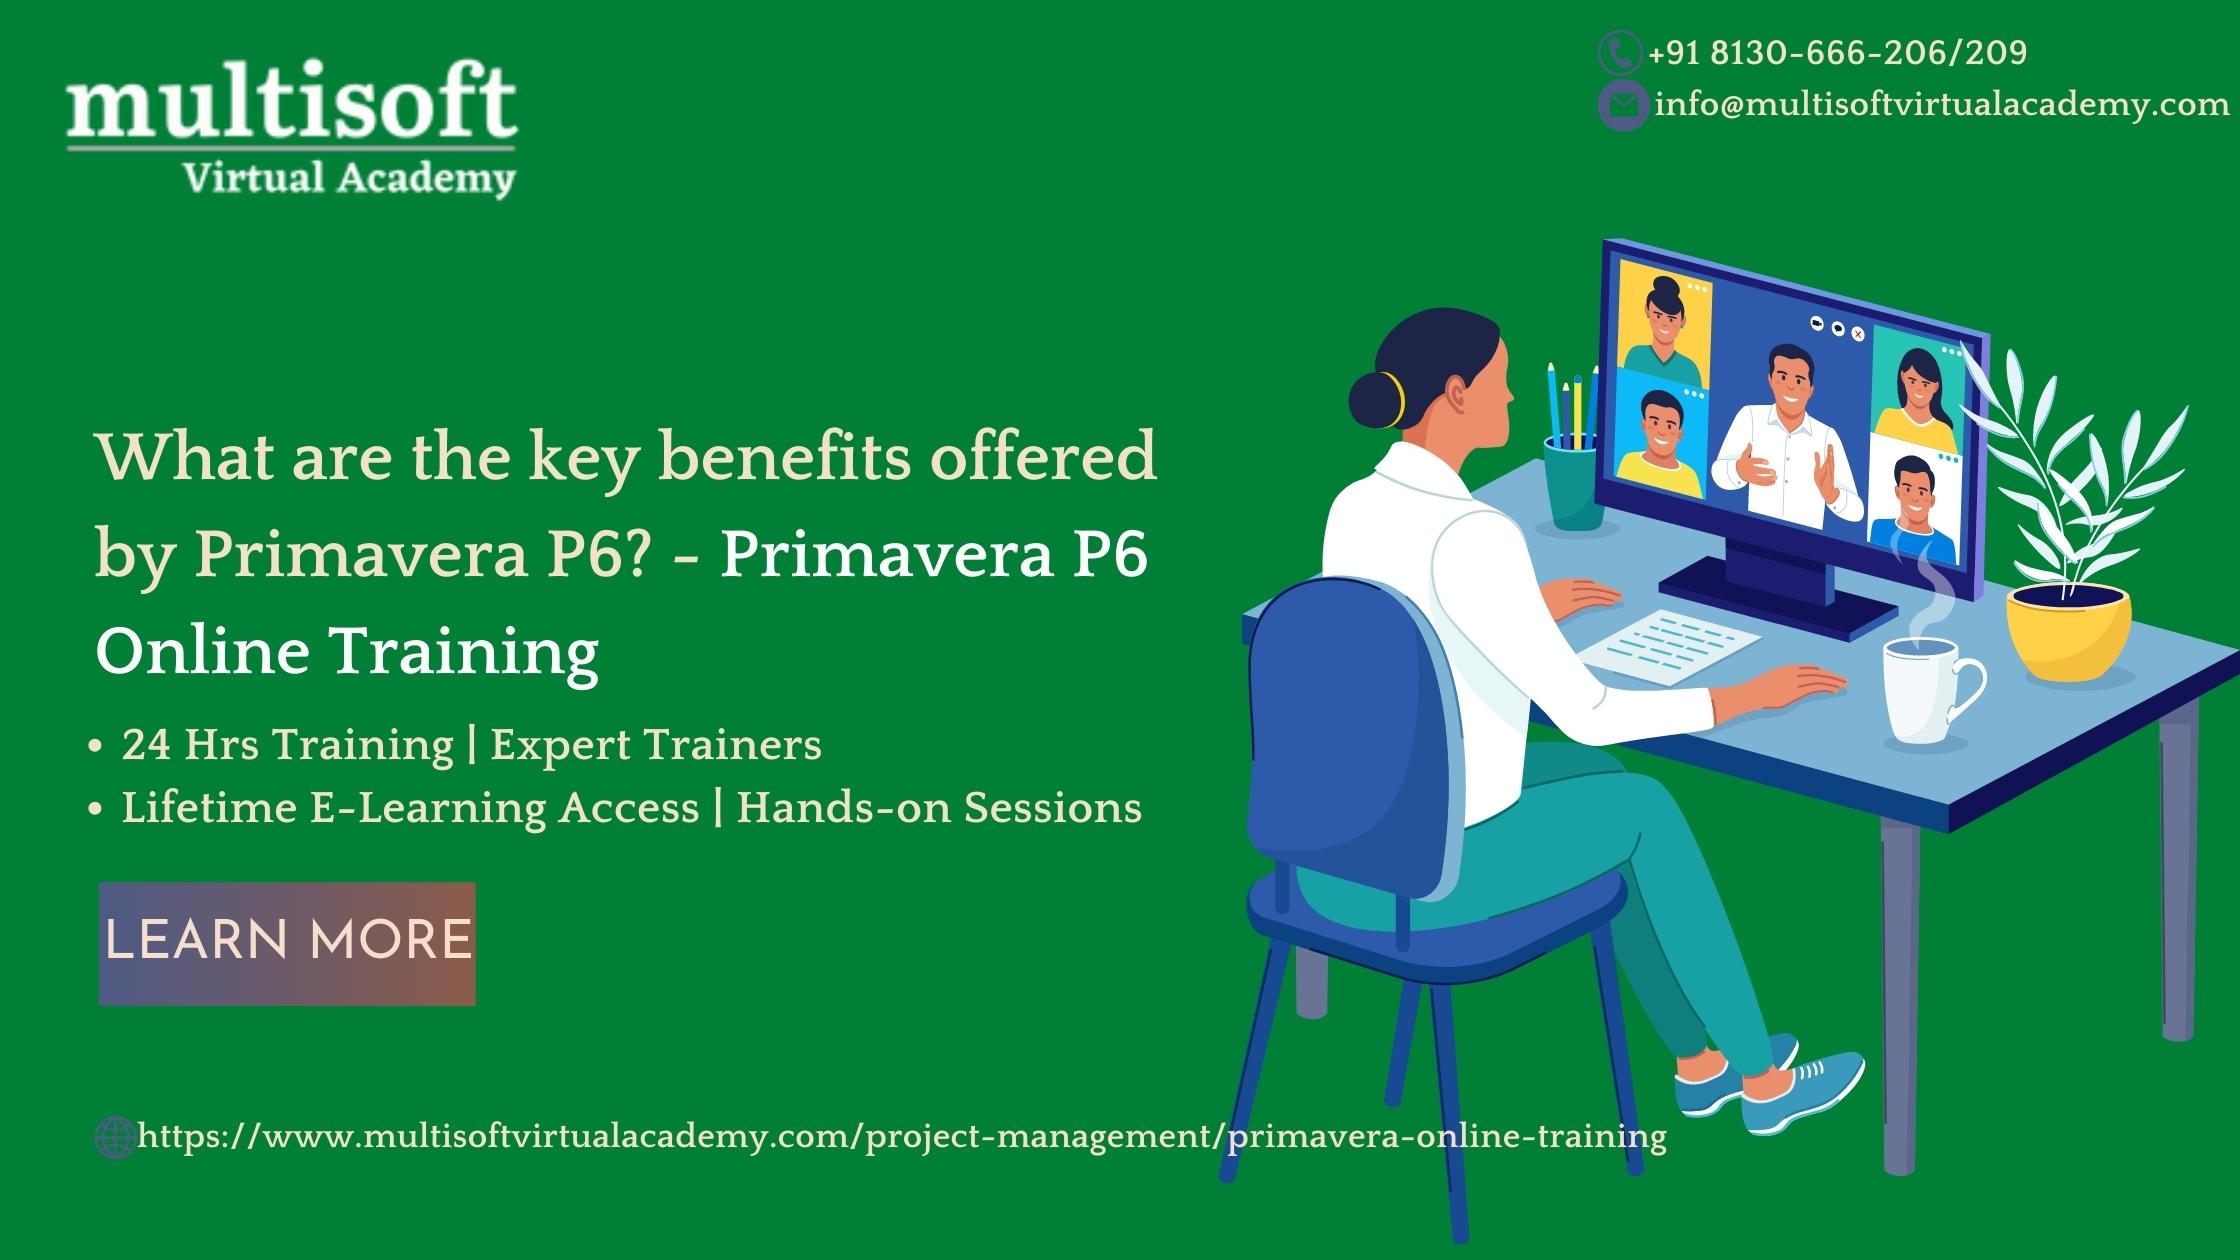 What are the key benefits offered by Primavera P6?  Primavera P6 Online Training